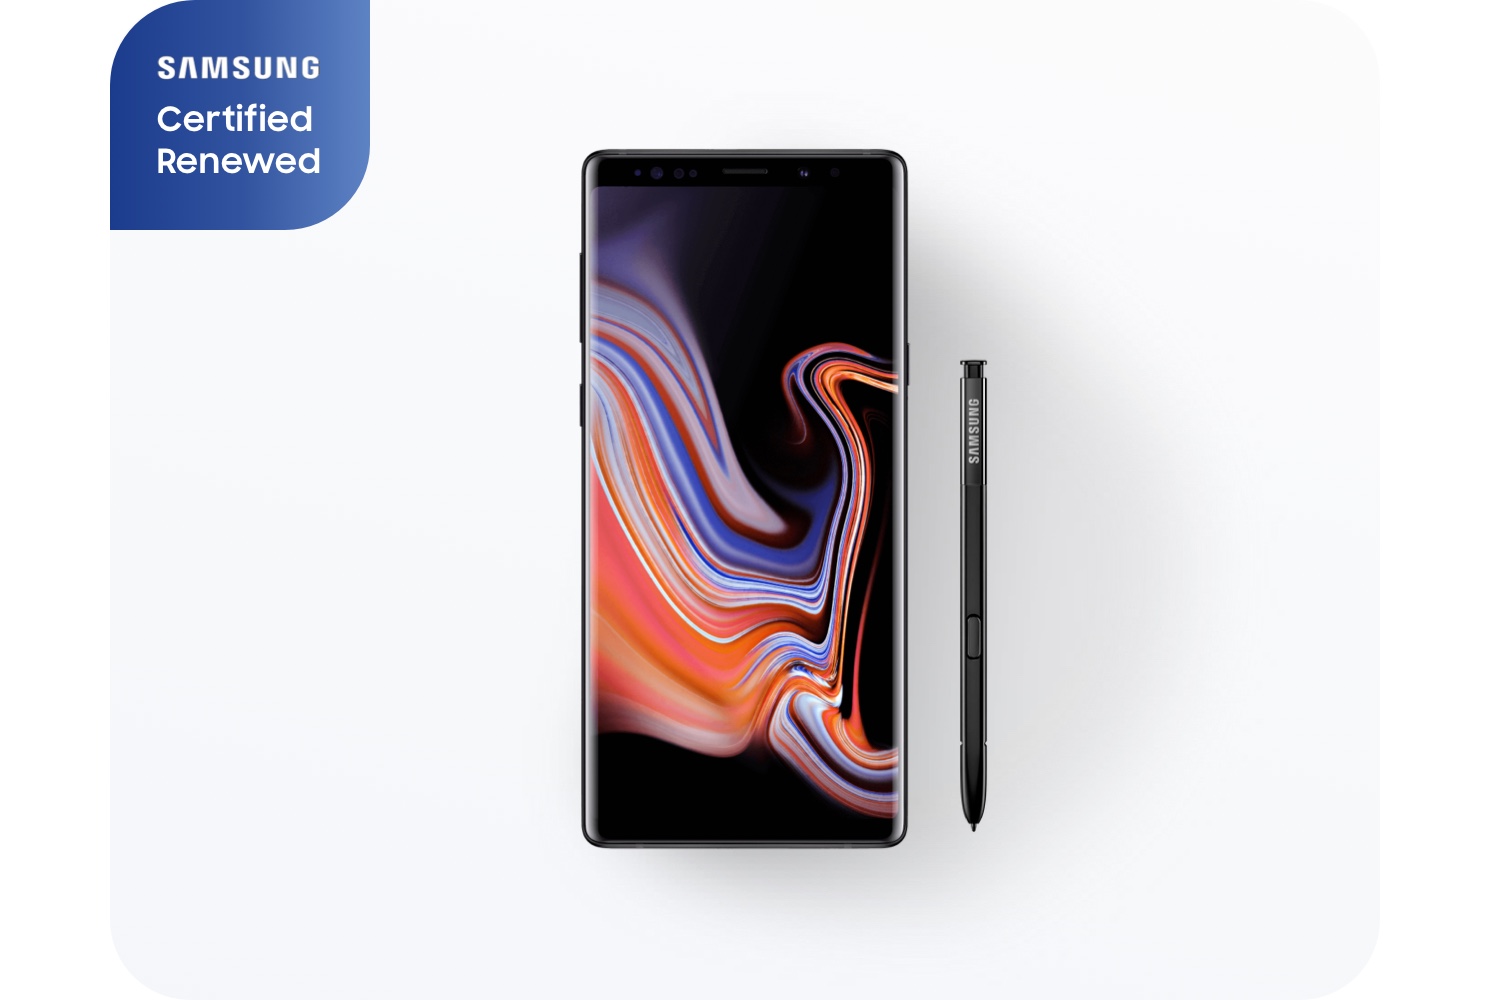 Galaxy Note9 for business